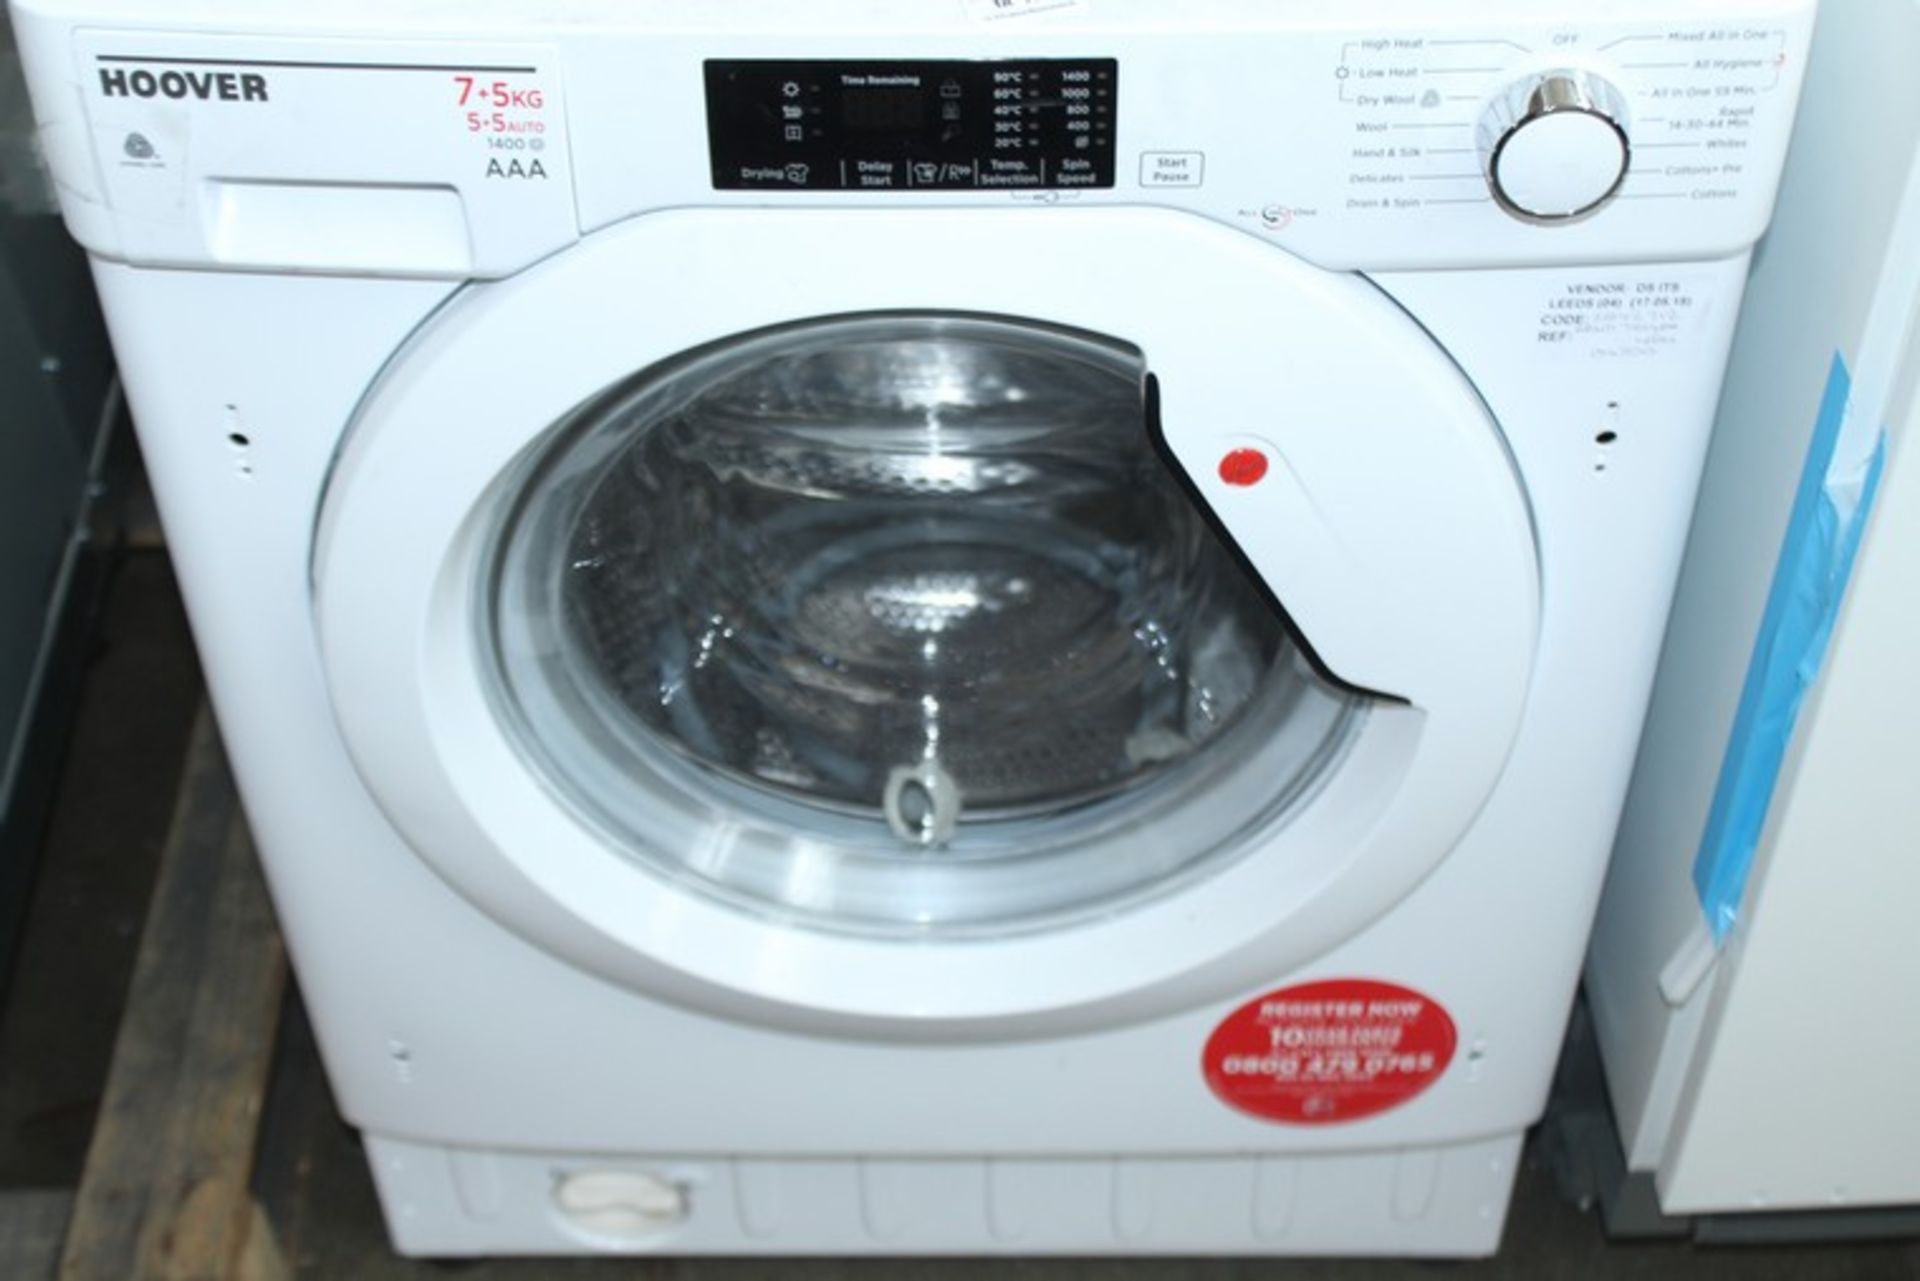 1 x HOOVER HBWD75140A WASHER DRYER RRP £420 (2647712) (17.05.18) *PLEASE NOTE THAT THE BID PRICE